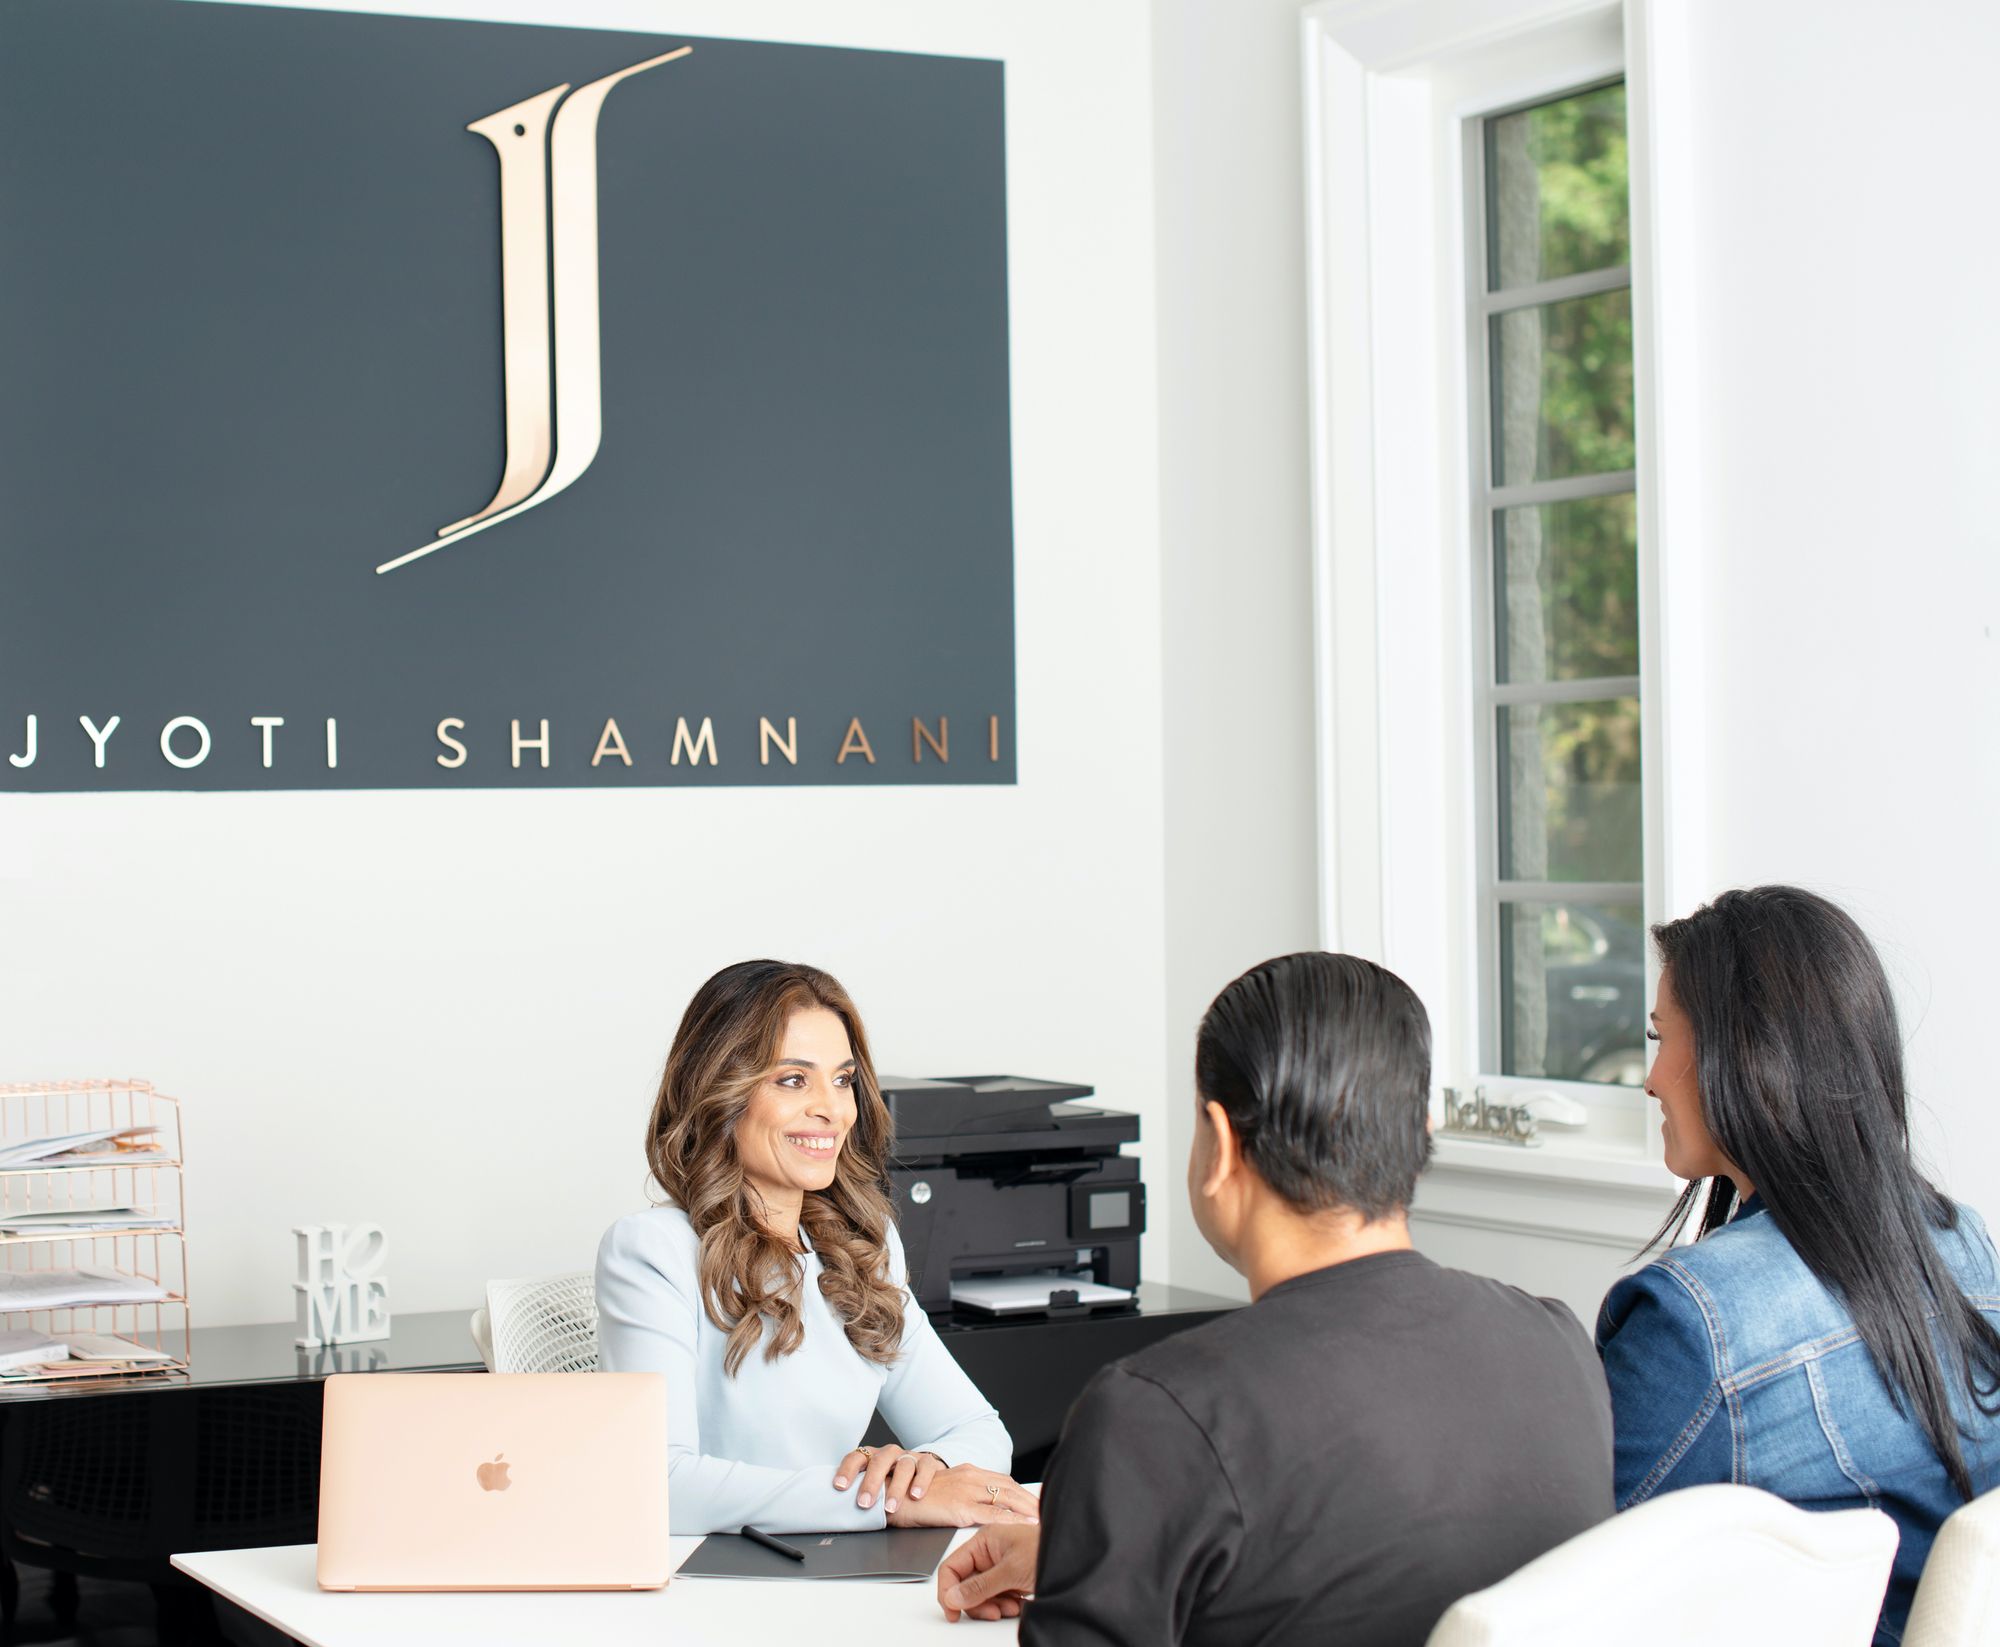 Exclusive interview with Jyoti Shamnani - Real Estate Agent at Royal LePage.